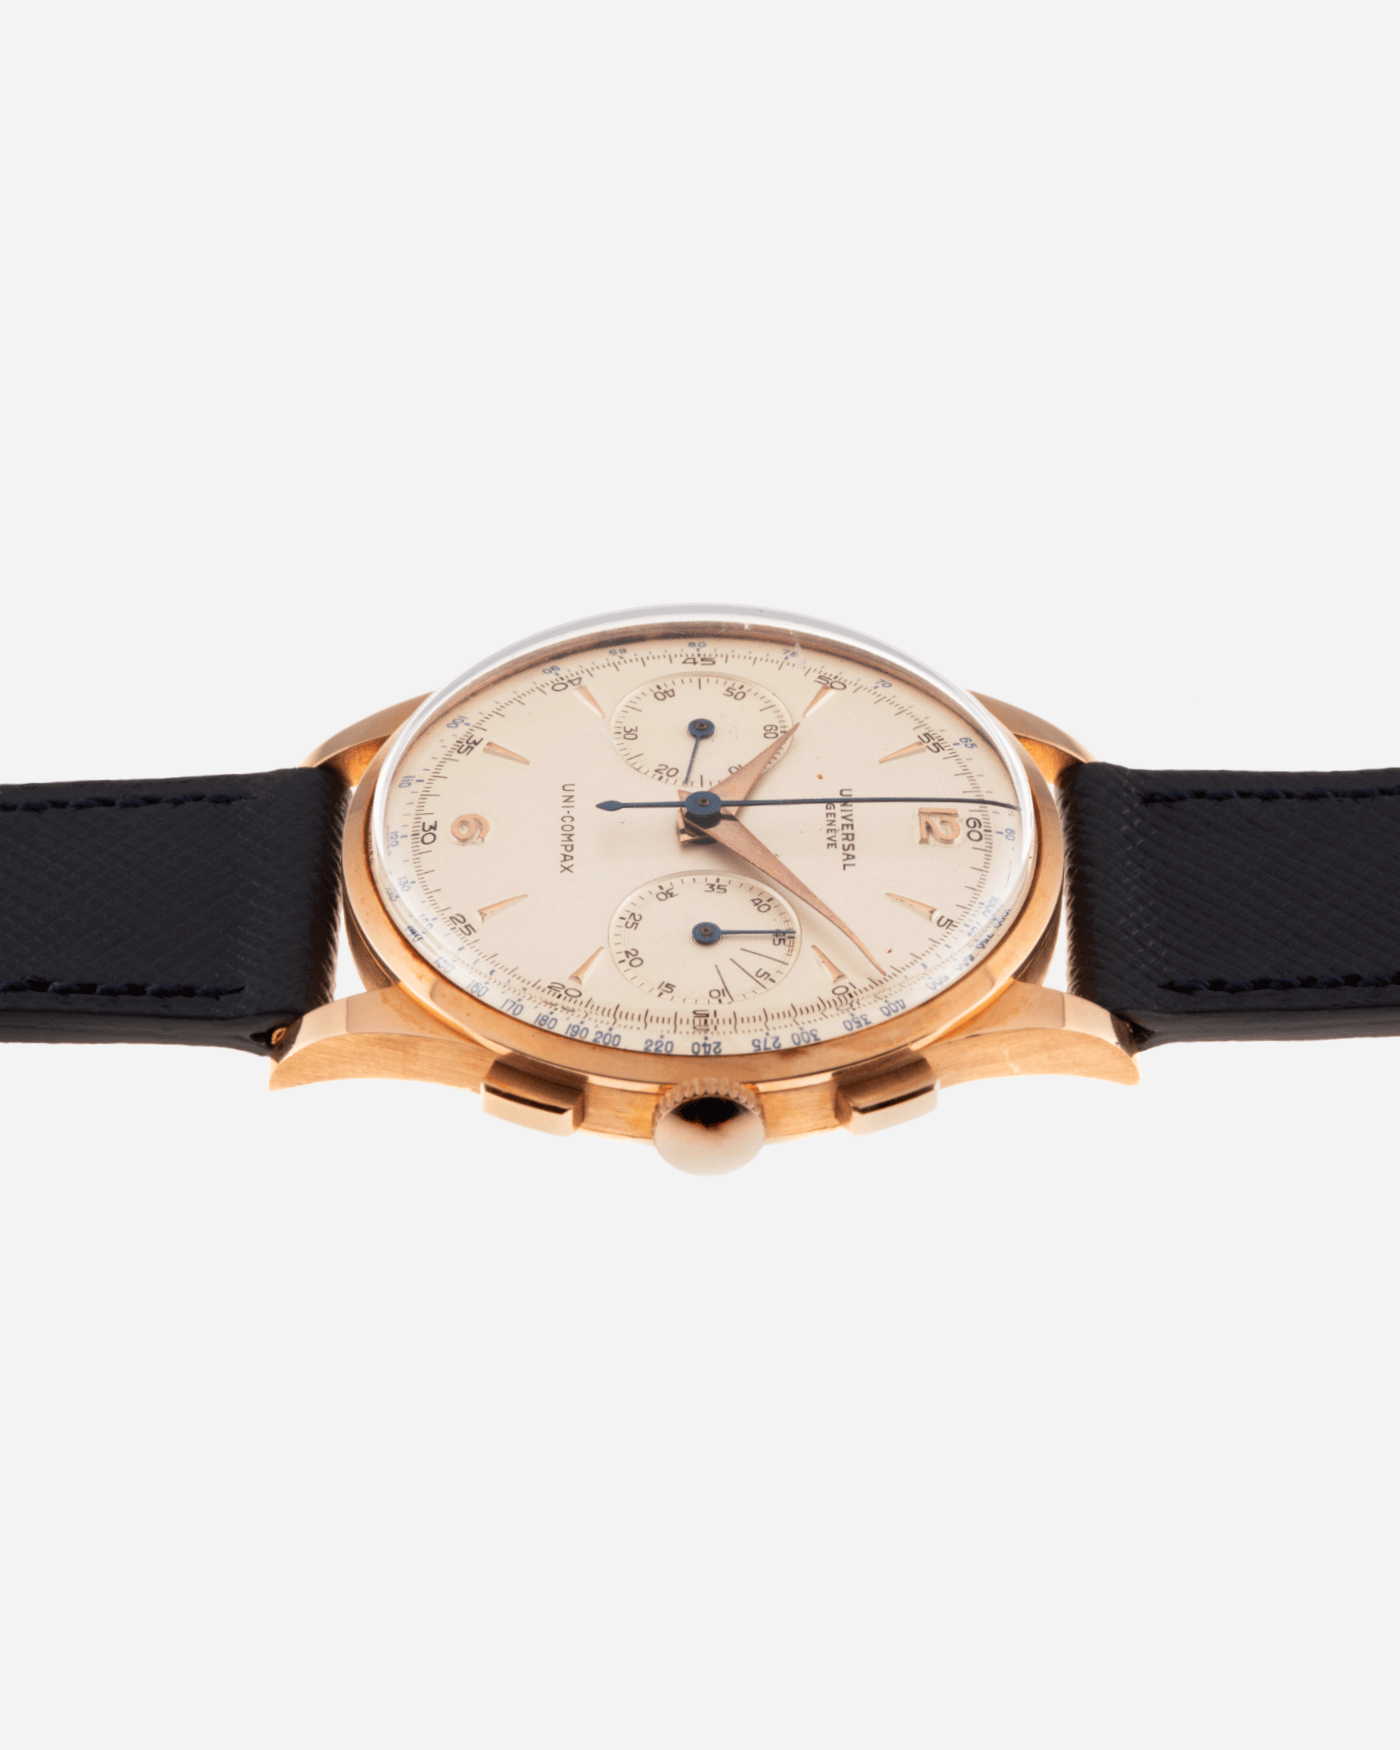 Brand: Universal Geneve Year: 1950’s Model: Uni-Compax Reference Number: 124103 Serial Number: 1550986 Material: 18k Pink Gold Movement: UG Cal. 285 Case Diameter: 37mm Lug Width: 20mm Bracelet/Strap: Molequin Navy Blue Textured Calf